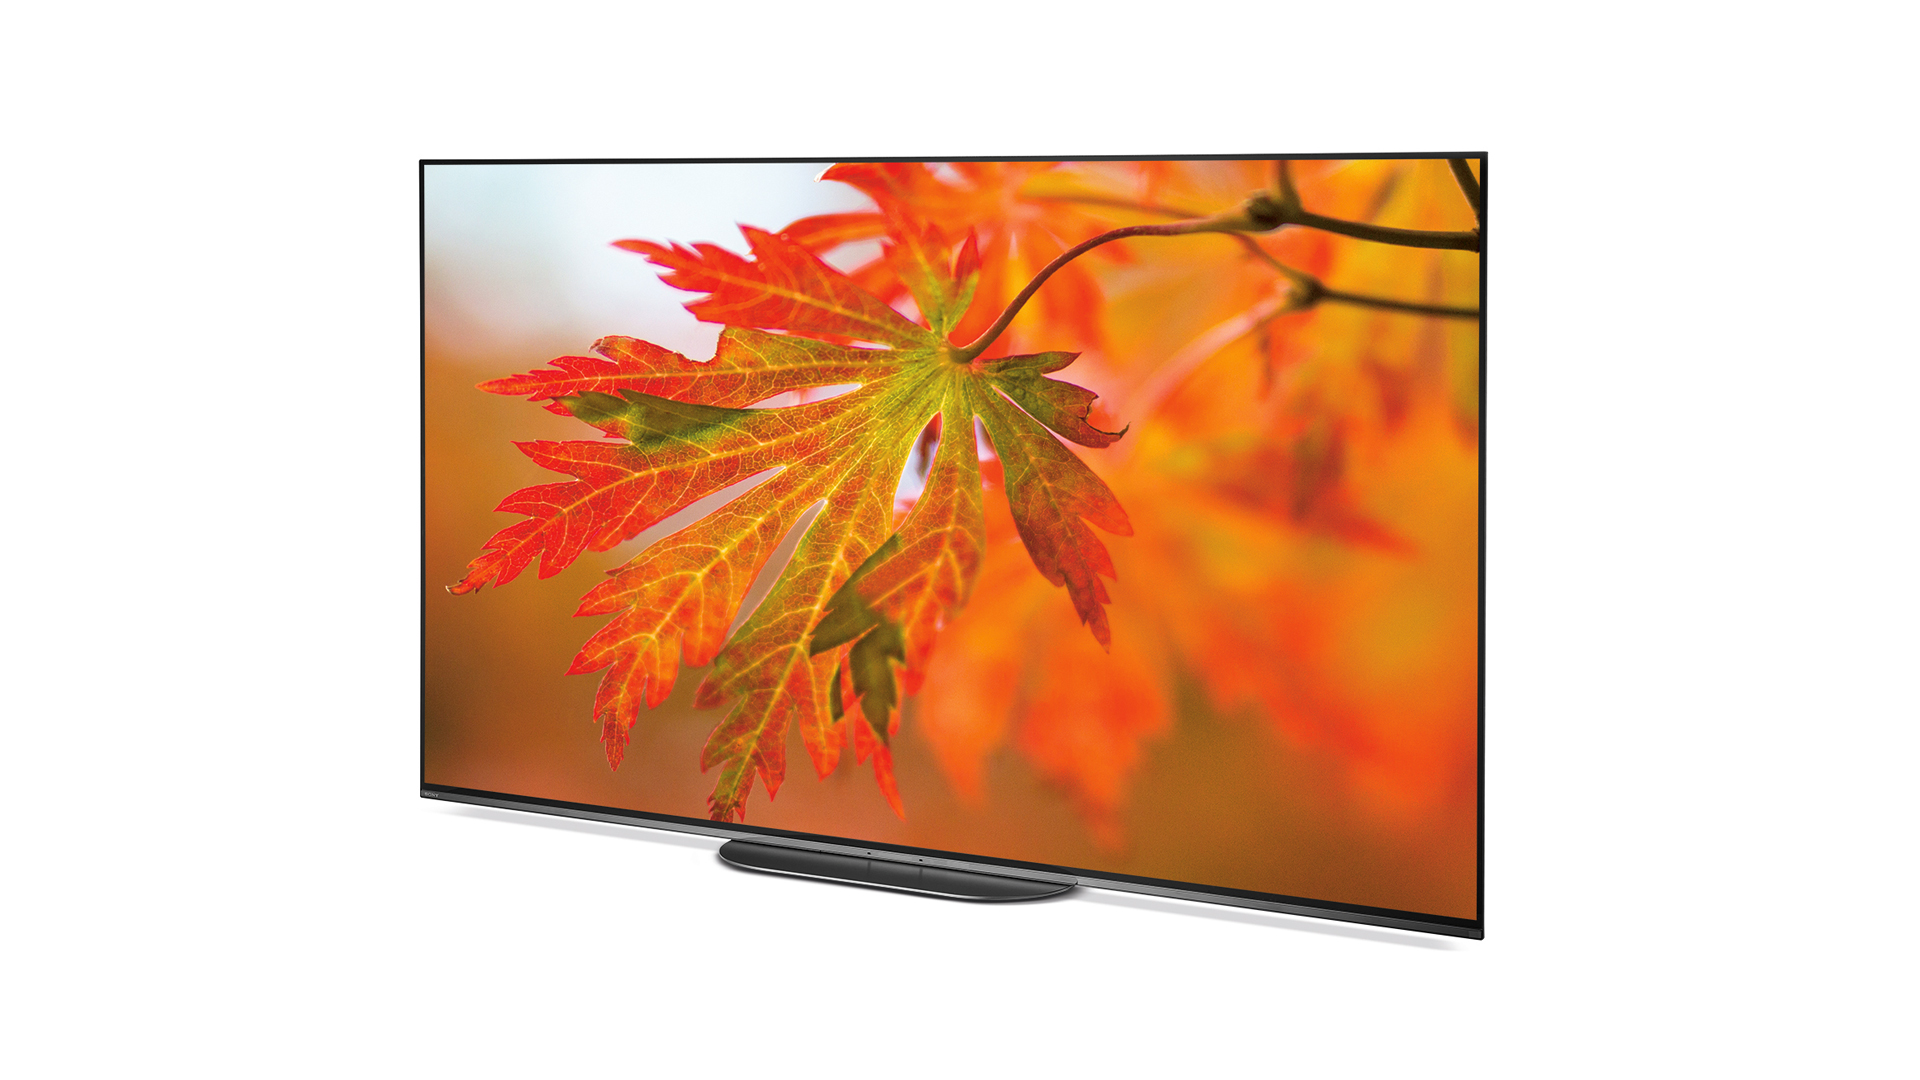 The best OLED TV deals 2021 get the best OLEDs at the lowest prices